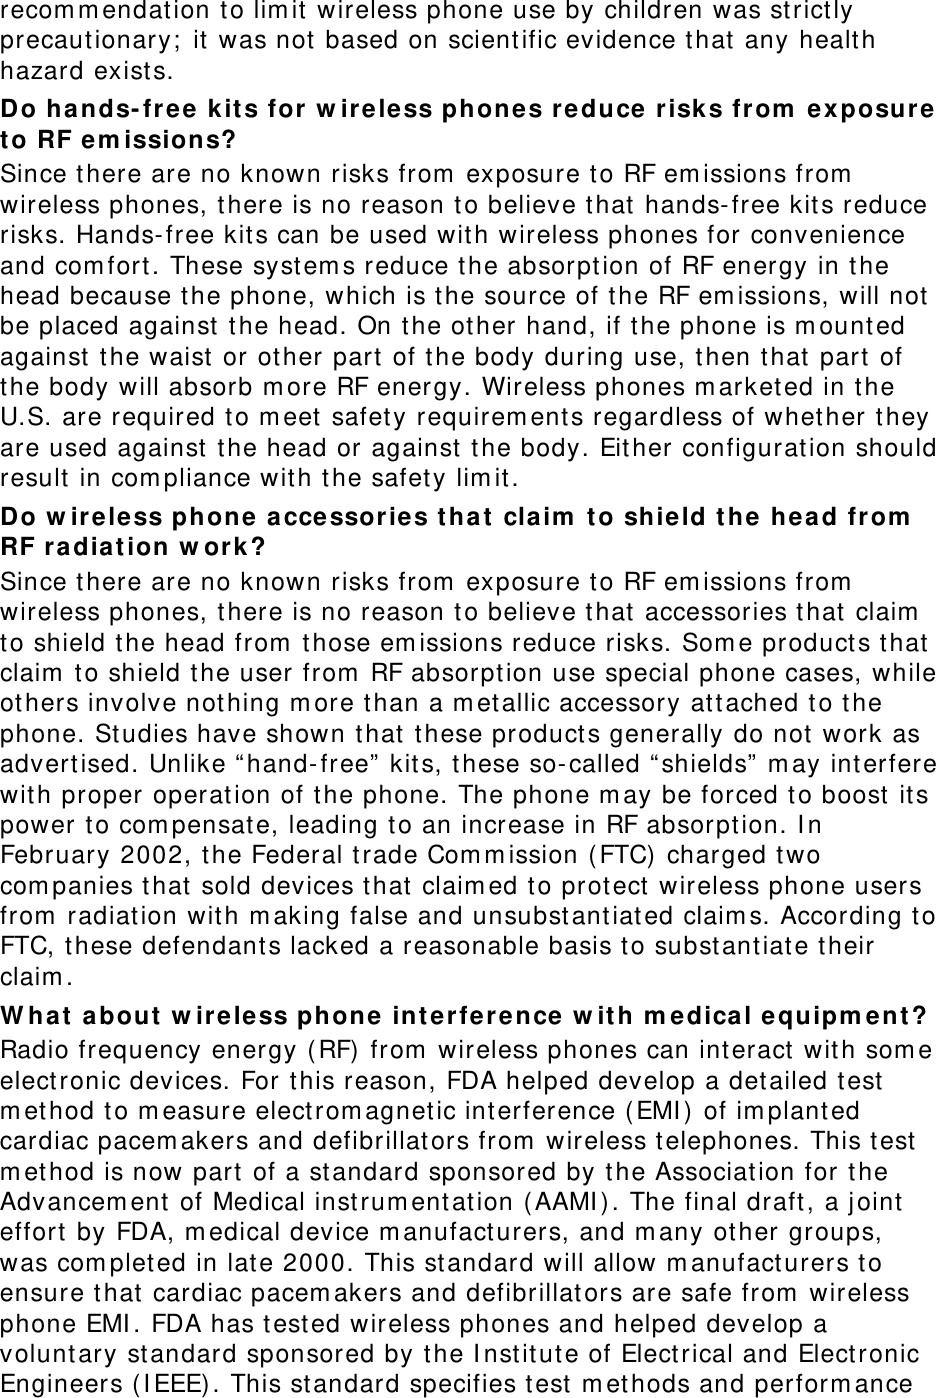 recom m endation to lim it wireless phone use by children was strict ly precaut ionary;  it was not  based on scient ific evidence that any healt h hazard exist s.   Do hands- free  kits for w ir e less phones reduce risk s from  ex posur e  t o RF e m issions? Since t here are no known risks from  exposure to RF em issions from  wireless phones, there is no reason to believe that hands- free kits reduce risks. Hands-free kit s can be used with wireless phones for convenience and com fort . These syst em s reduce the absorpt ion of RF energy in the head because the phone, which is t he source of the RF em issions, will not  be placed against  the head. On t he other hand, if the phone is m ount ed against  the waist  or other part of t he body during use, then that  part of the body will absorb m ore RF energy. Wireless phones m arketed in t he U.S. are required to m eet  safety requirem ents regardless of whet her t hey are used against  the head or against  t he body. Eit her configuration should result in com pliance with t he safety lim it . Do w ire le ss phone acce ssor ie s tha t cla im  t o shield the hea d from  RF radiat ion w or k ? Since t here are no known risks from  exposure to RF em issions from  wireless phones, there is no reason to believe that accessories that  claim  to shield the head from  t hose em issions reduce risks. Som e products t hat  claim  to shield t he user from  RF absorpt ion use special phone cases, while others involve nothing m ore than a m et allic accessory at t ached to the phone. St udies have shown t hat  these product s generally do not work as advert ised. Unlike “ hand-free” kits, t hese so-called “ shields”  m ay int erfere wit h proper operation of the phone. The phone m ay be forced to boost  its power t o com pensate, leading t o an increase in RF absorpt ion. I n February 2002, the Federal trade Com m ission (FTC)  charged two com panies that  sold devices t hat  claim ed to protect wireless phone users from  radiation wit h m aking false and unsubst ant iated claim s. According t o FTC, these defendant s lacked a reasonable basis to subst ant iate their claim . W ha t  about  w ir e less phone inter fer e nce w ith m edical equipm ent ? Radio frequency energy (RF)  from  wireless phones can interact  with som e electronic devices. For this reason, FDA helped develop a det ailed test  m et hod to m easure elect rom agnet ic interference (EMI ) of im planted cardiac pacem akers and defibrillat ors from  wireless telephones. This t est m et hod is now part  of a st andard sponsored by t he Associat ion for t he Advancem ent of Medical instrum ent ation (AAMI ) . The final draft, a j oint  effort  by FDA, m edical device m anufact urers, and m any ot her groups, was com pleted in lat e 2000. This st andard will allow m anufact urers to ensure that cardiac pacem akers and defibrillat ors are safe from  wireless phone EMI . FDA has test ed wireless phones and helped develop a volunt ary st andard sponsored by the I nst it ut e of Electrical and Elect ronic Engineers ( I EEE) . This st andard specifies t est m ethods and perform ance 